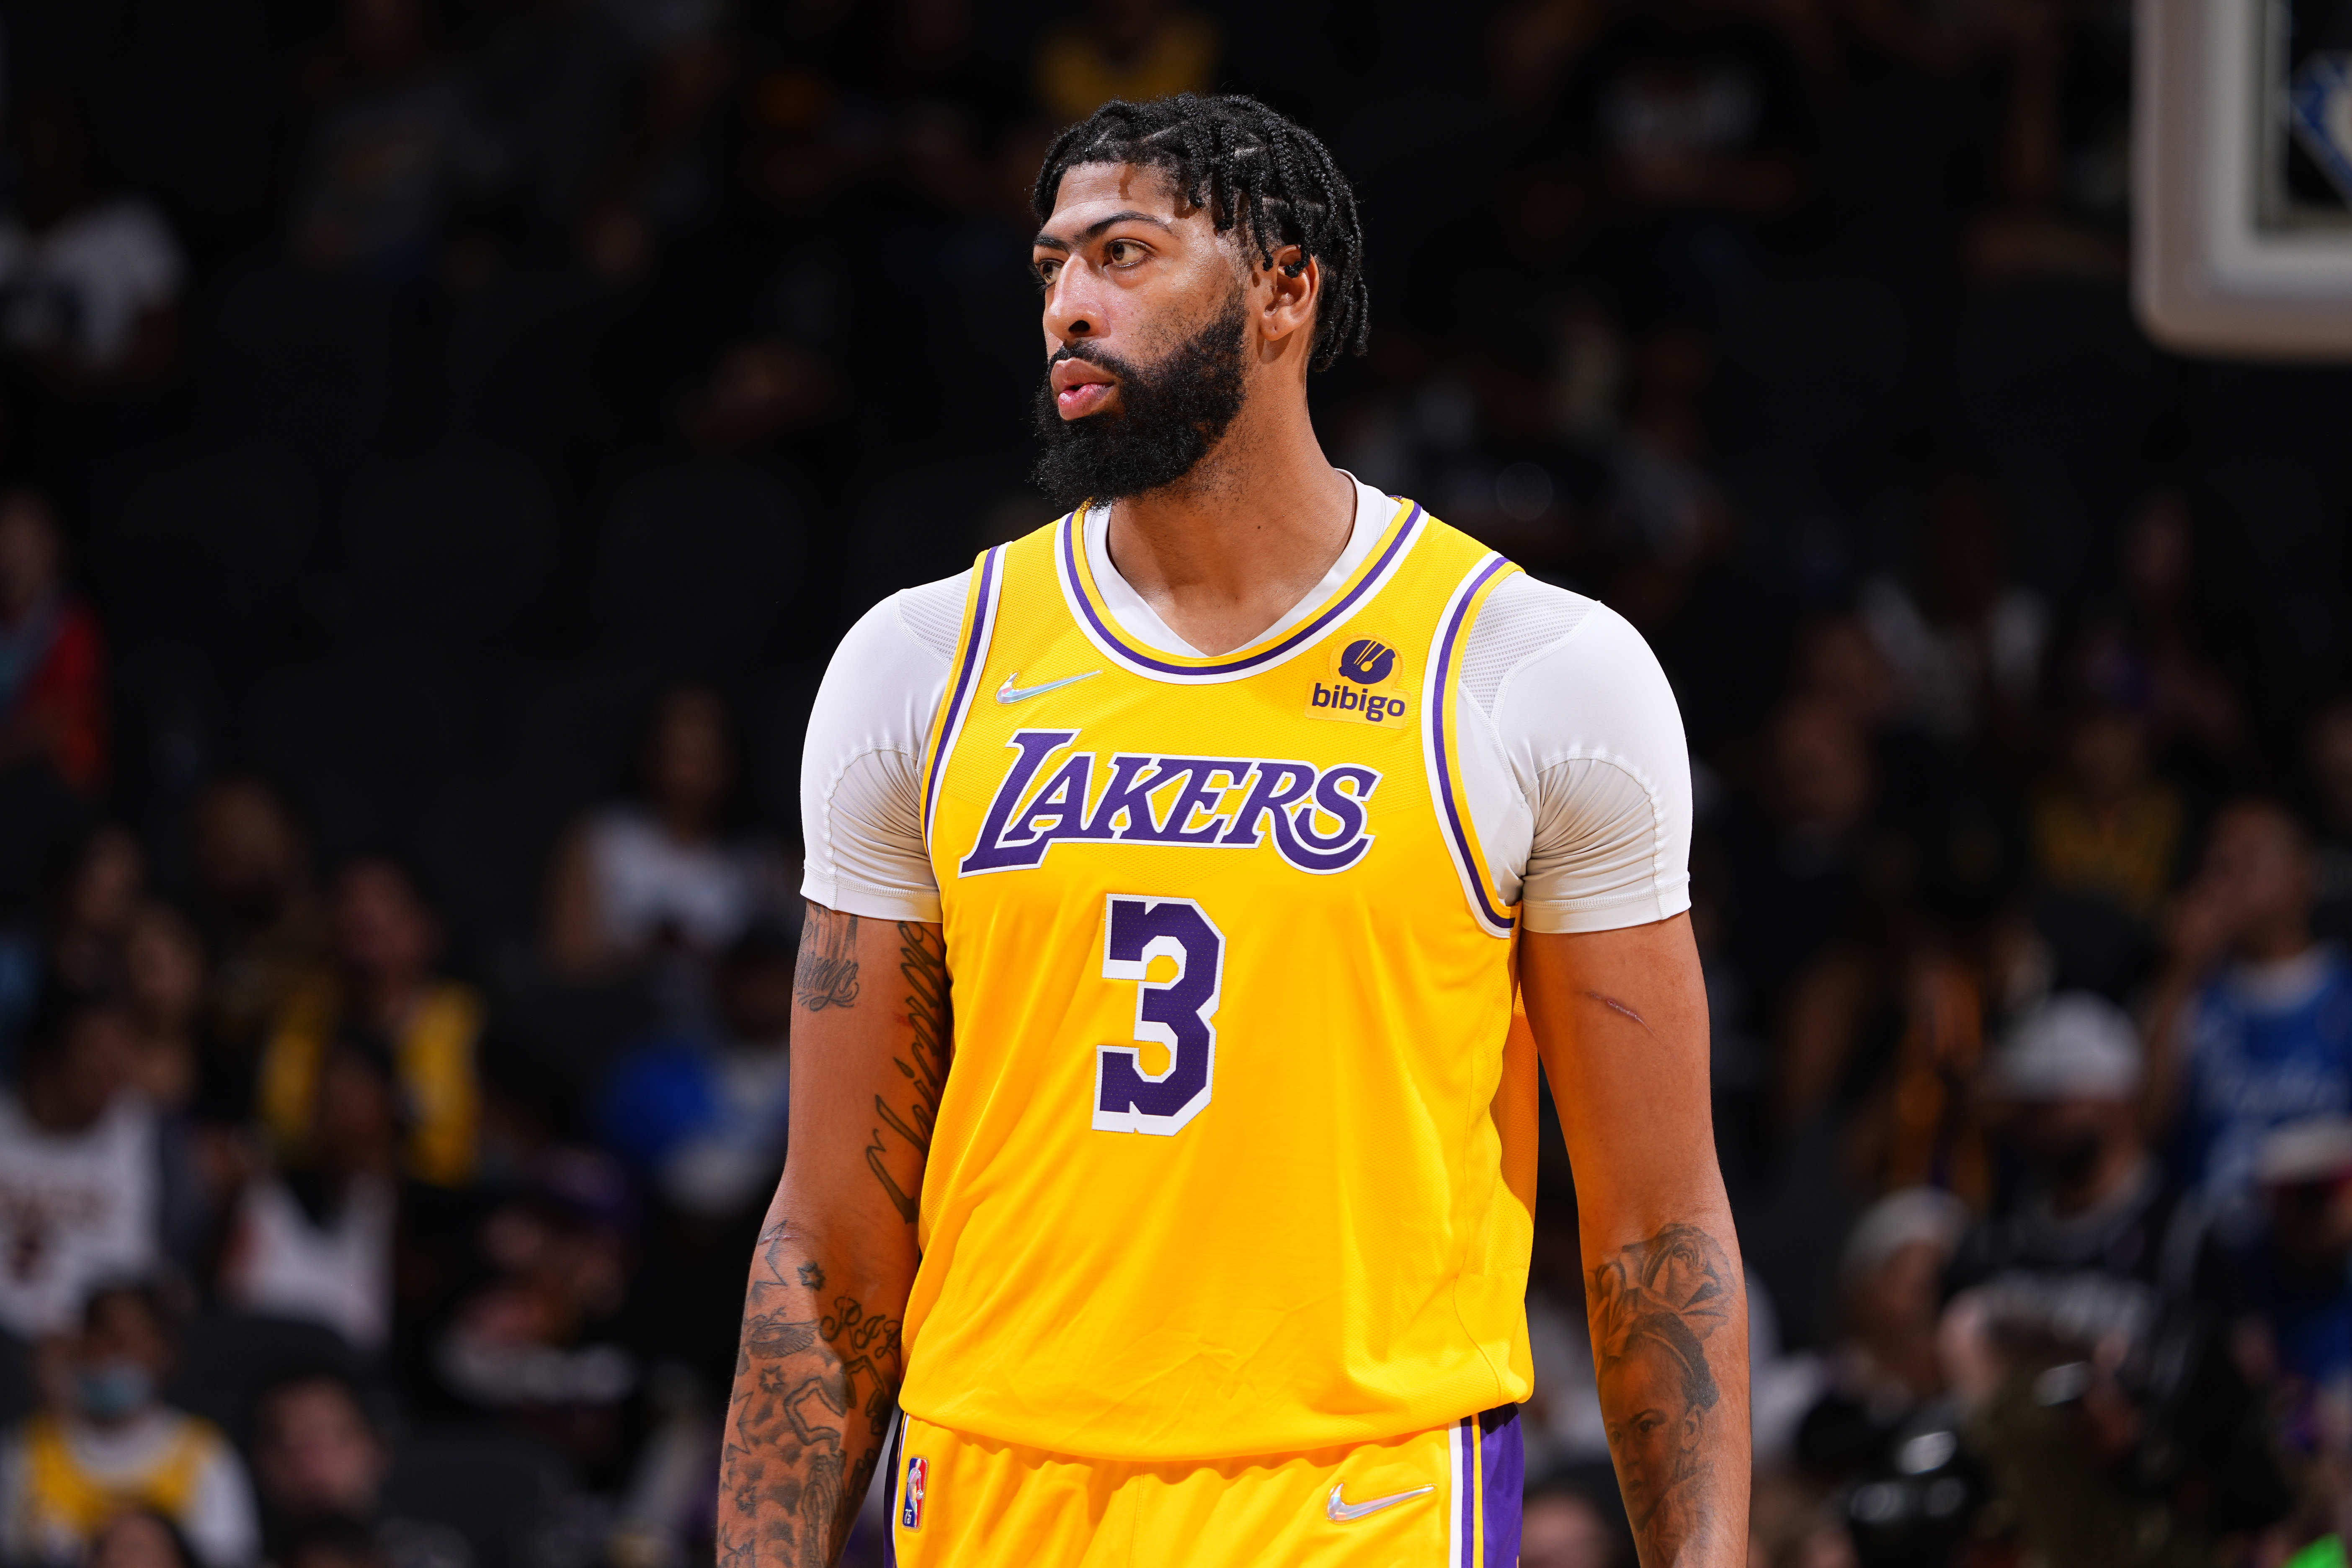 Lakers' Anthony Davis Says Knee Injury Suffered vs. Spurs Was 'A